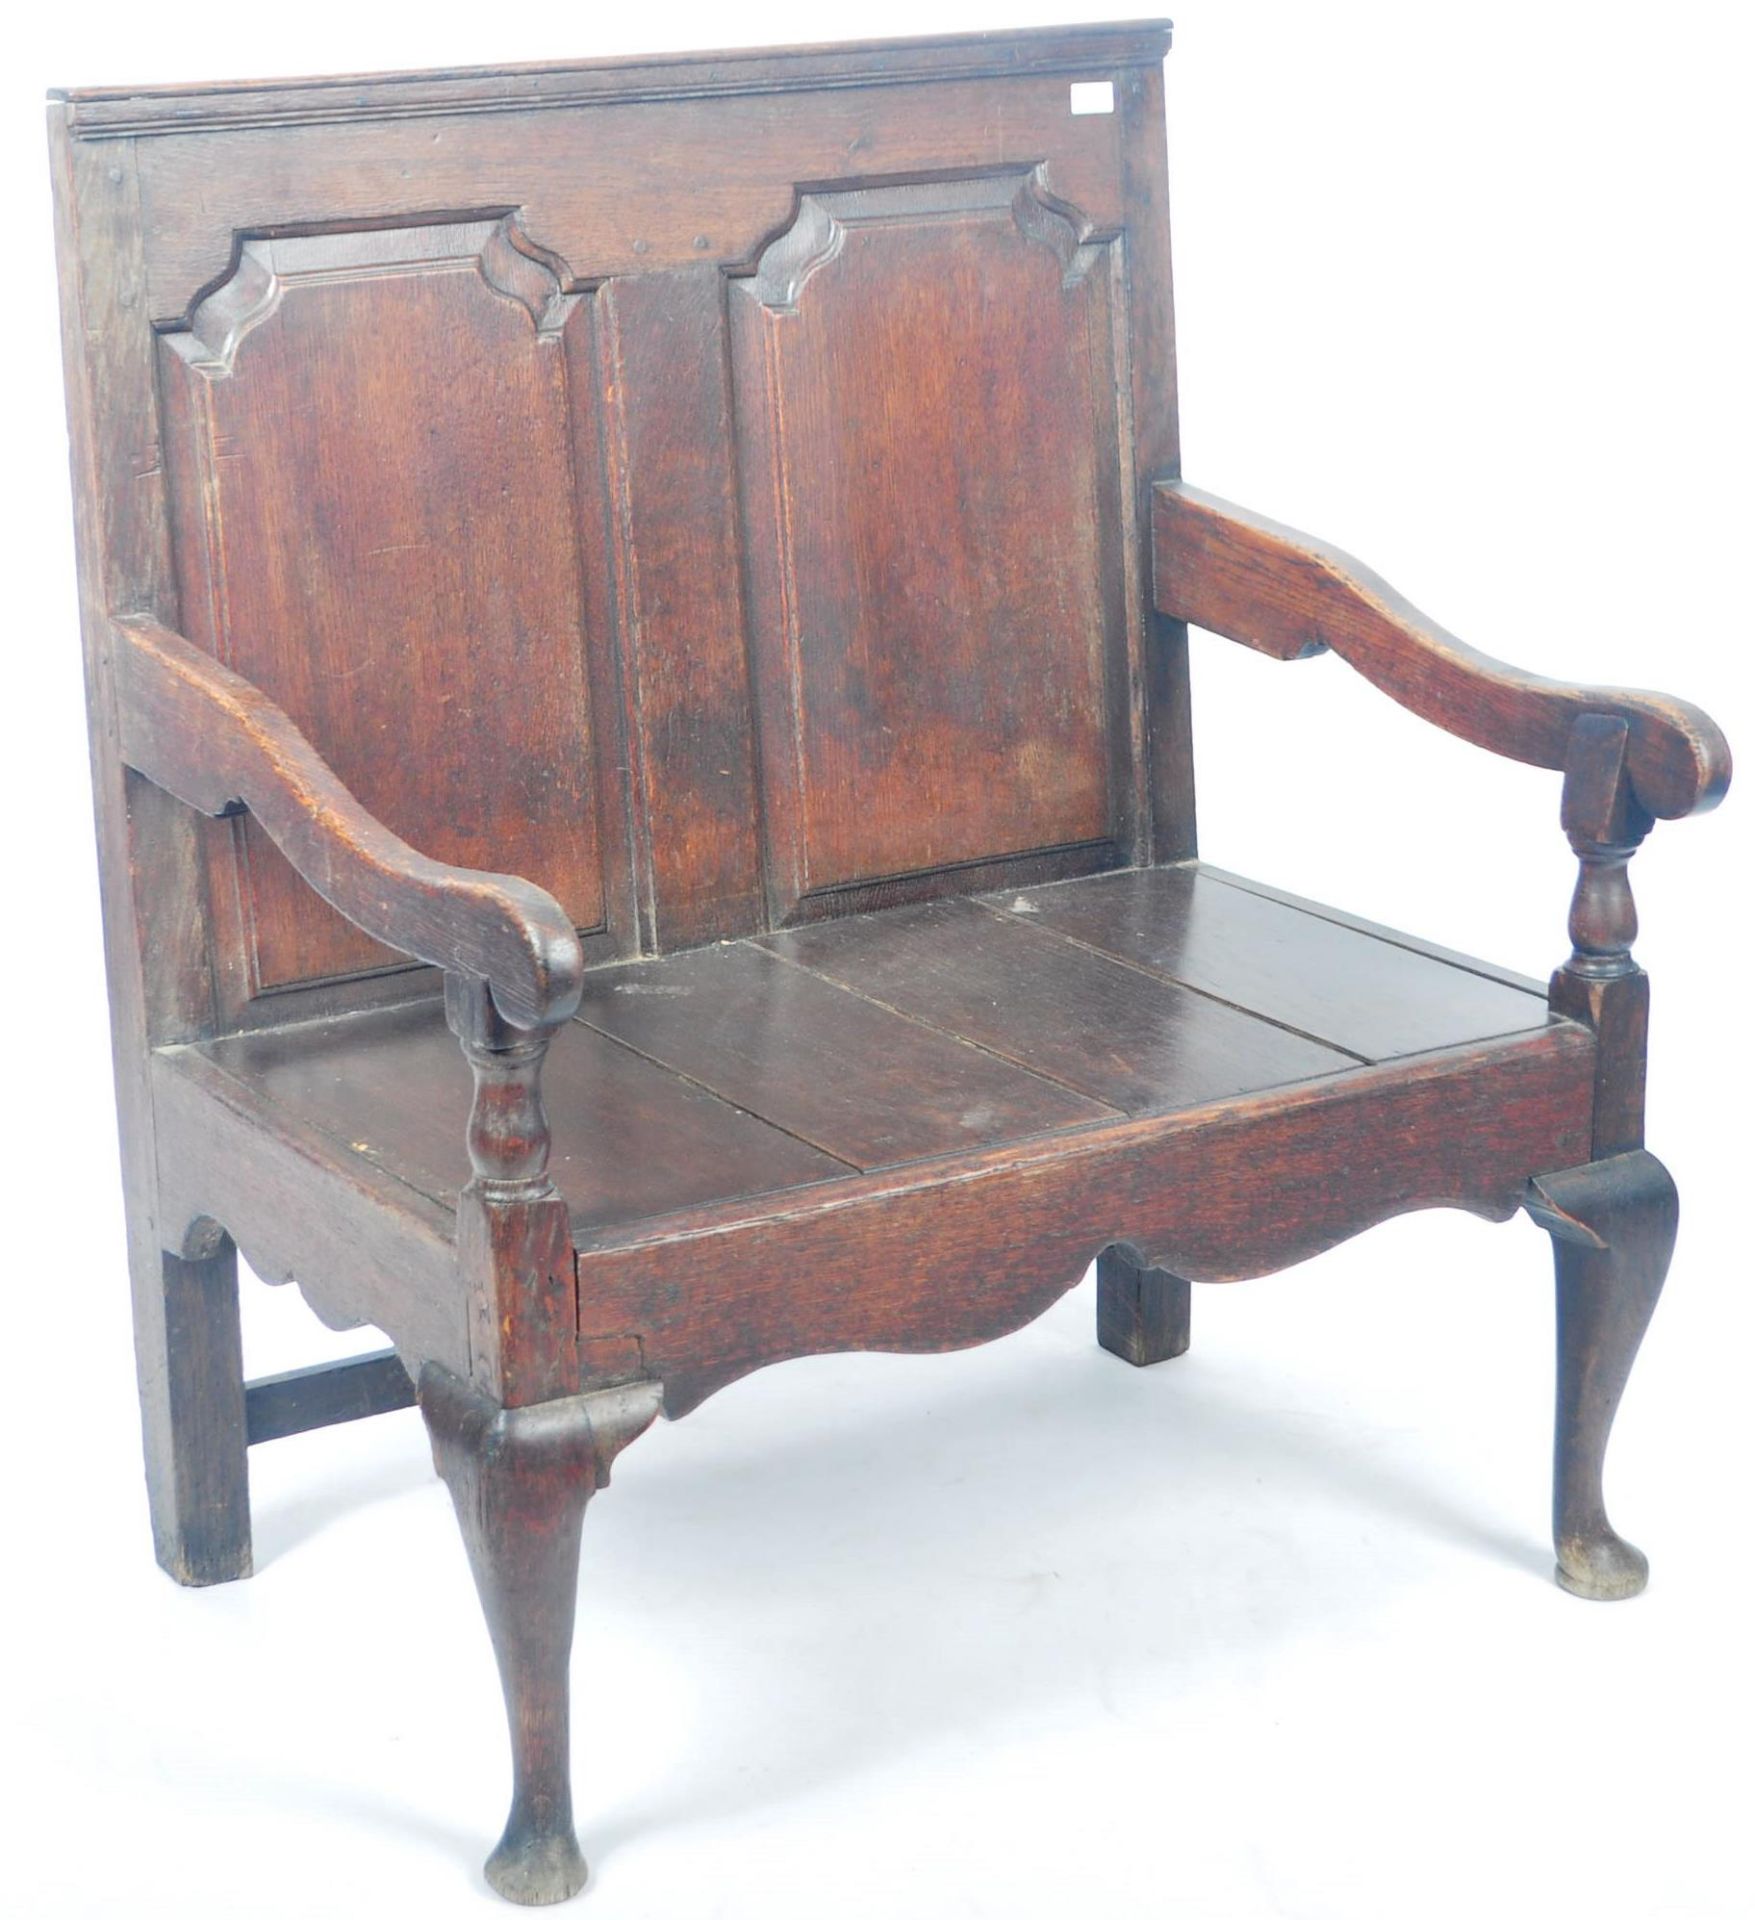 ANTIQUE 18TH CENTURY OAK TWO SEATER HALL SETTLE BENCH - Image 2 of 6